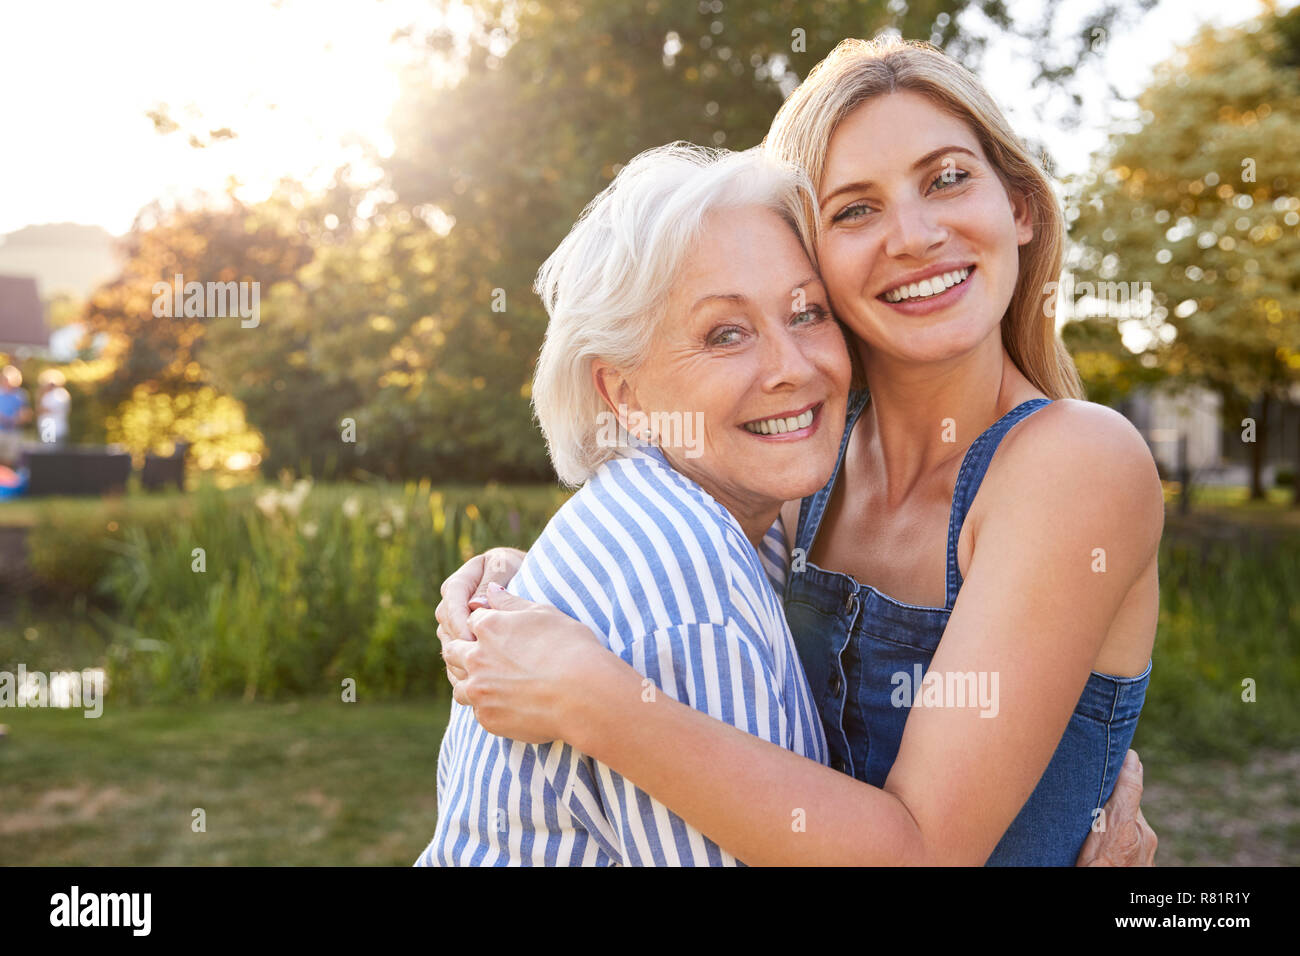 Portrait Of Smiling Mother and Daughter Outdoors in Summer Park Banque D'Images